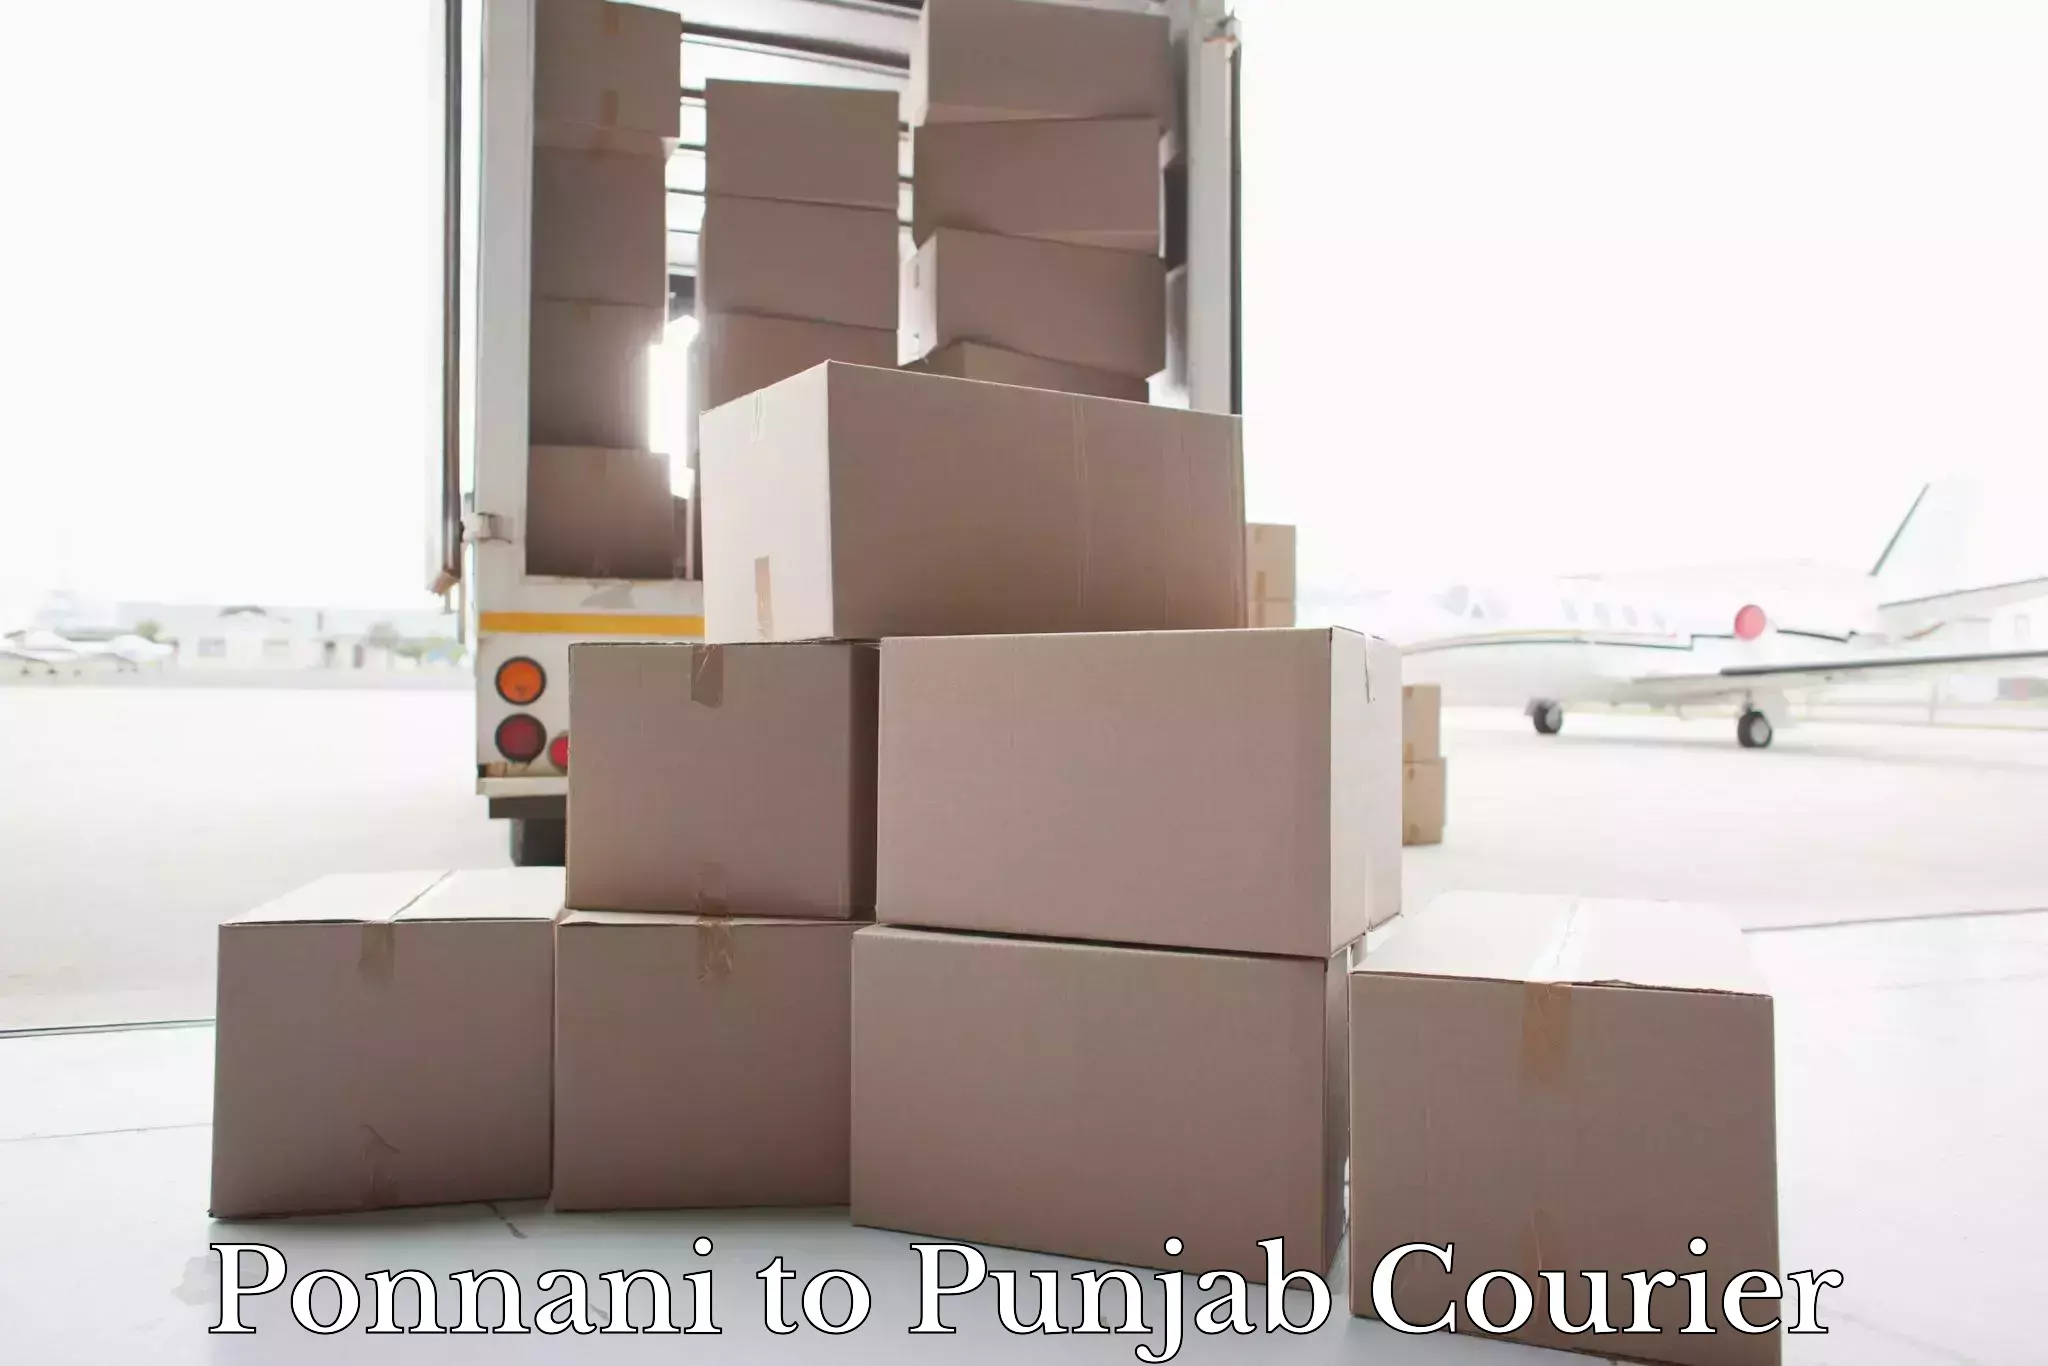 Luggage shipping specialists Ponnani to Ludhiana